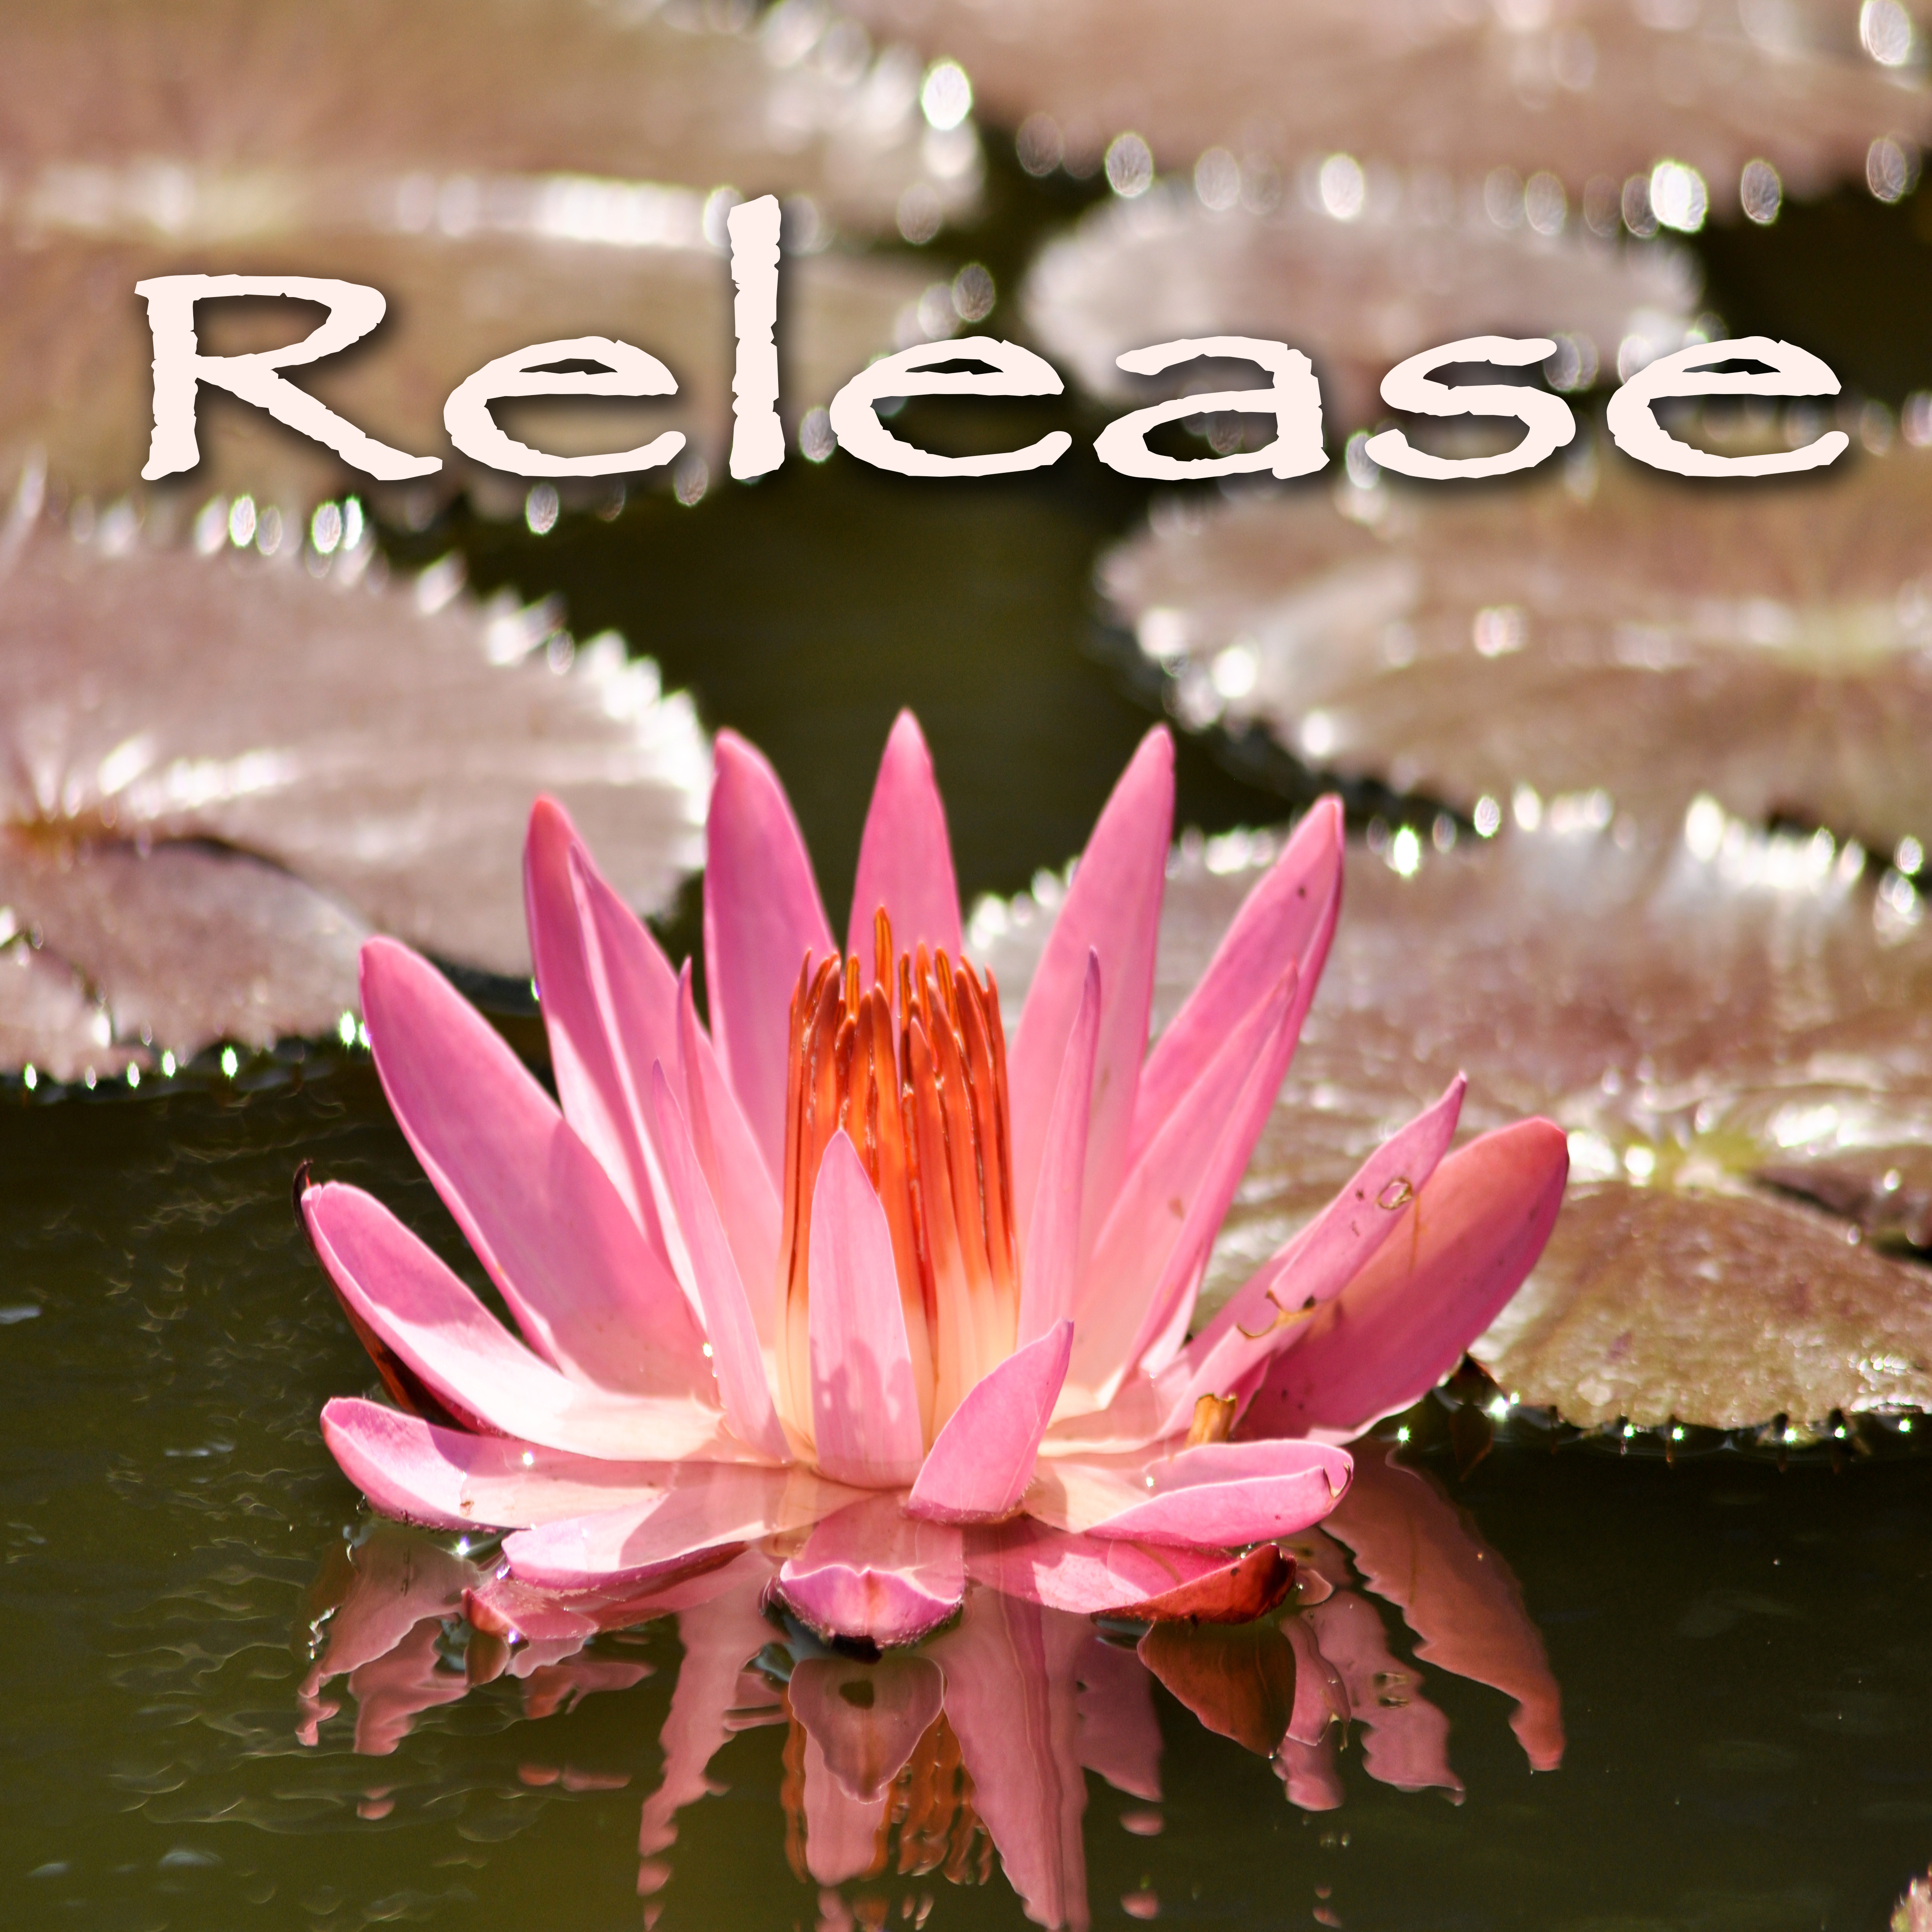 Release – Soothing Chakra Healing Music to Relax & Breathing Prana Flow